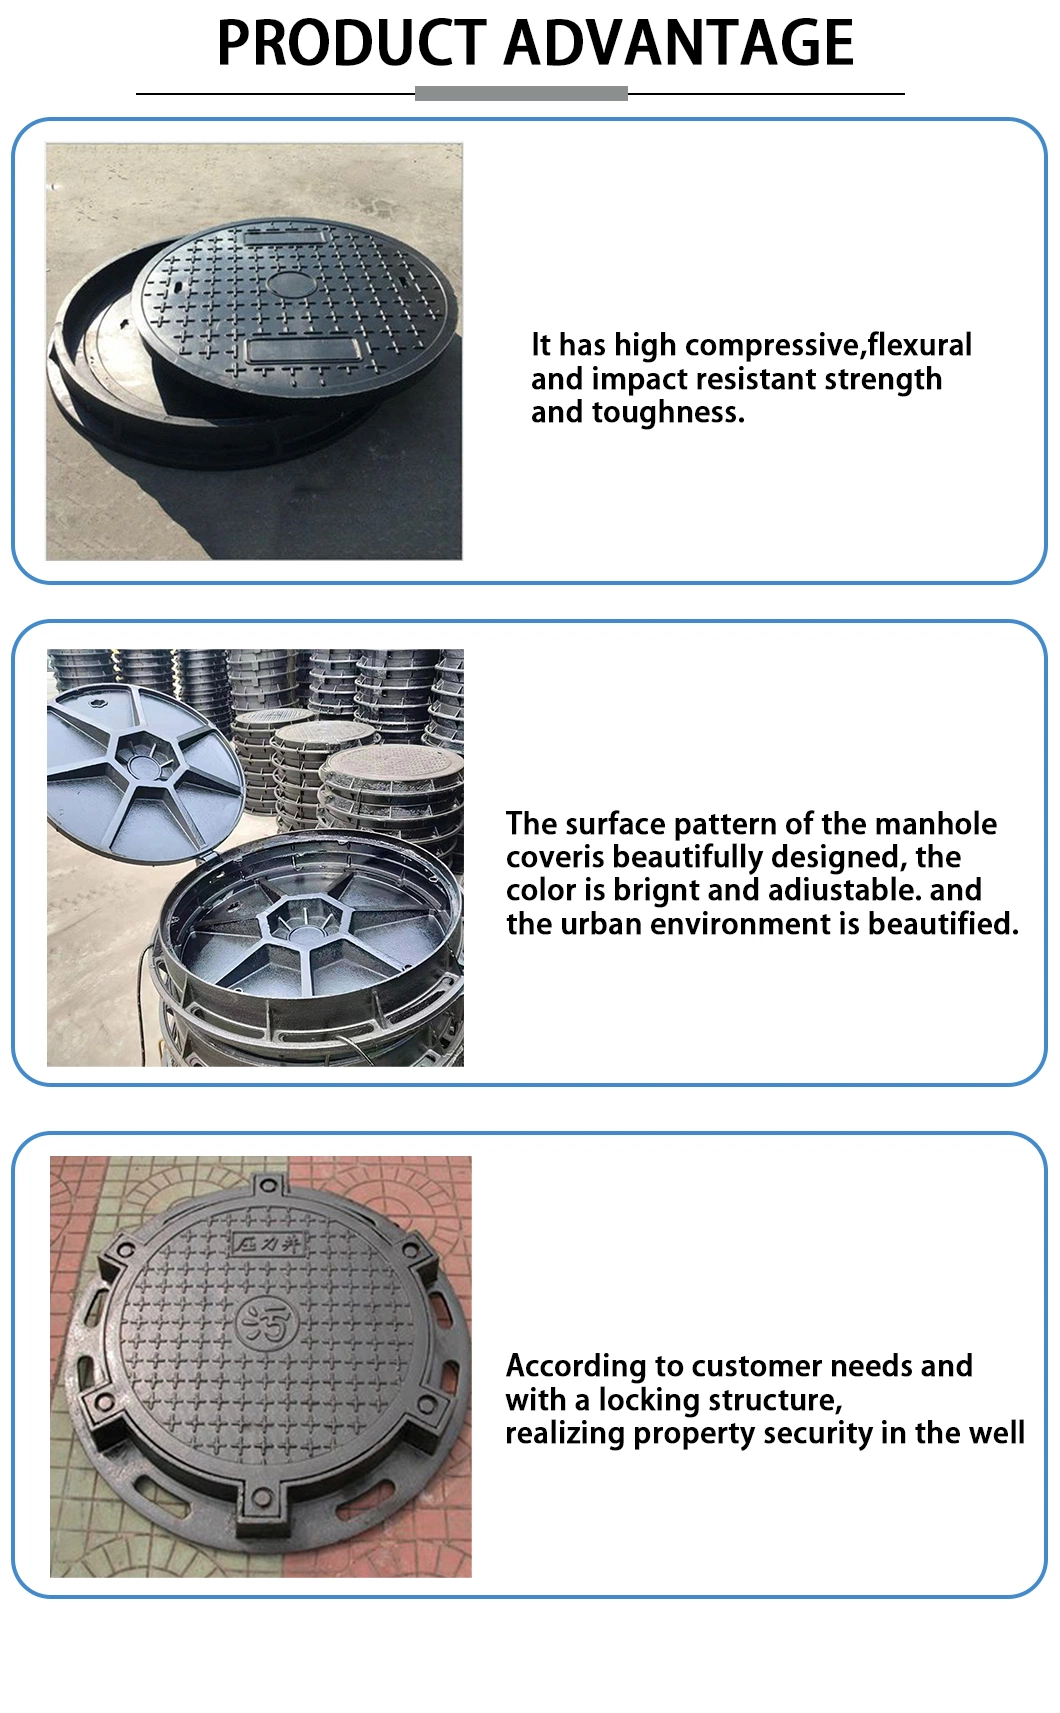 En124 D400 C250 Epoxy Coating Dci Ductile Iron Recessed Water Tank Manhole Cover